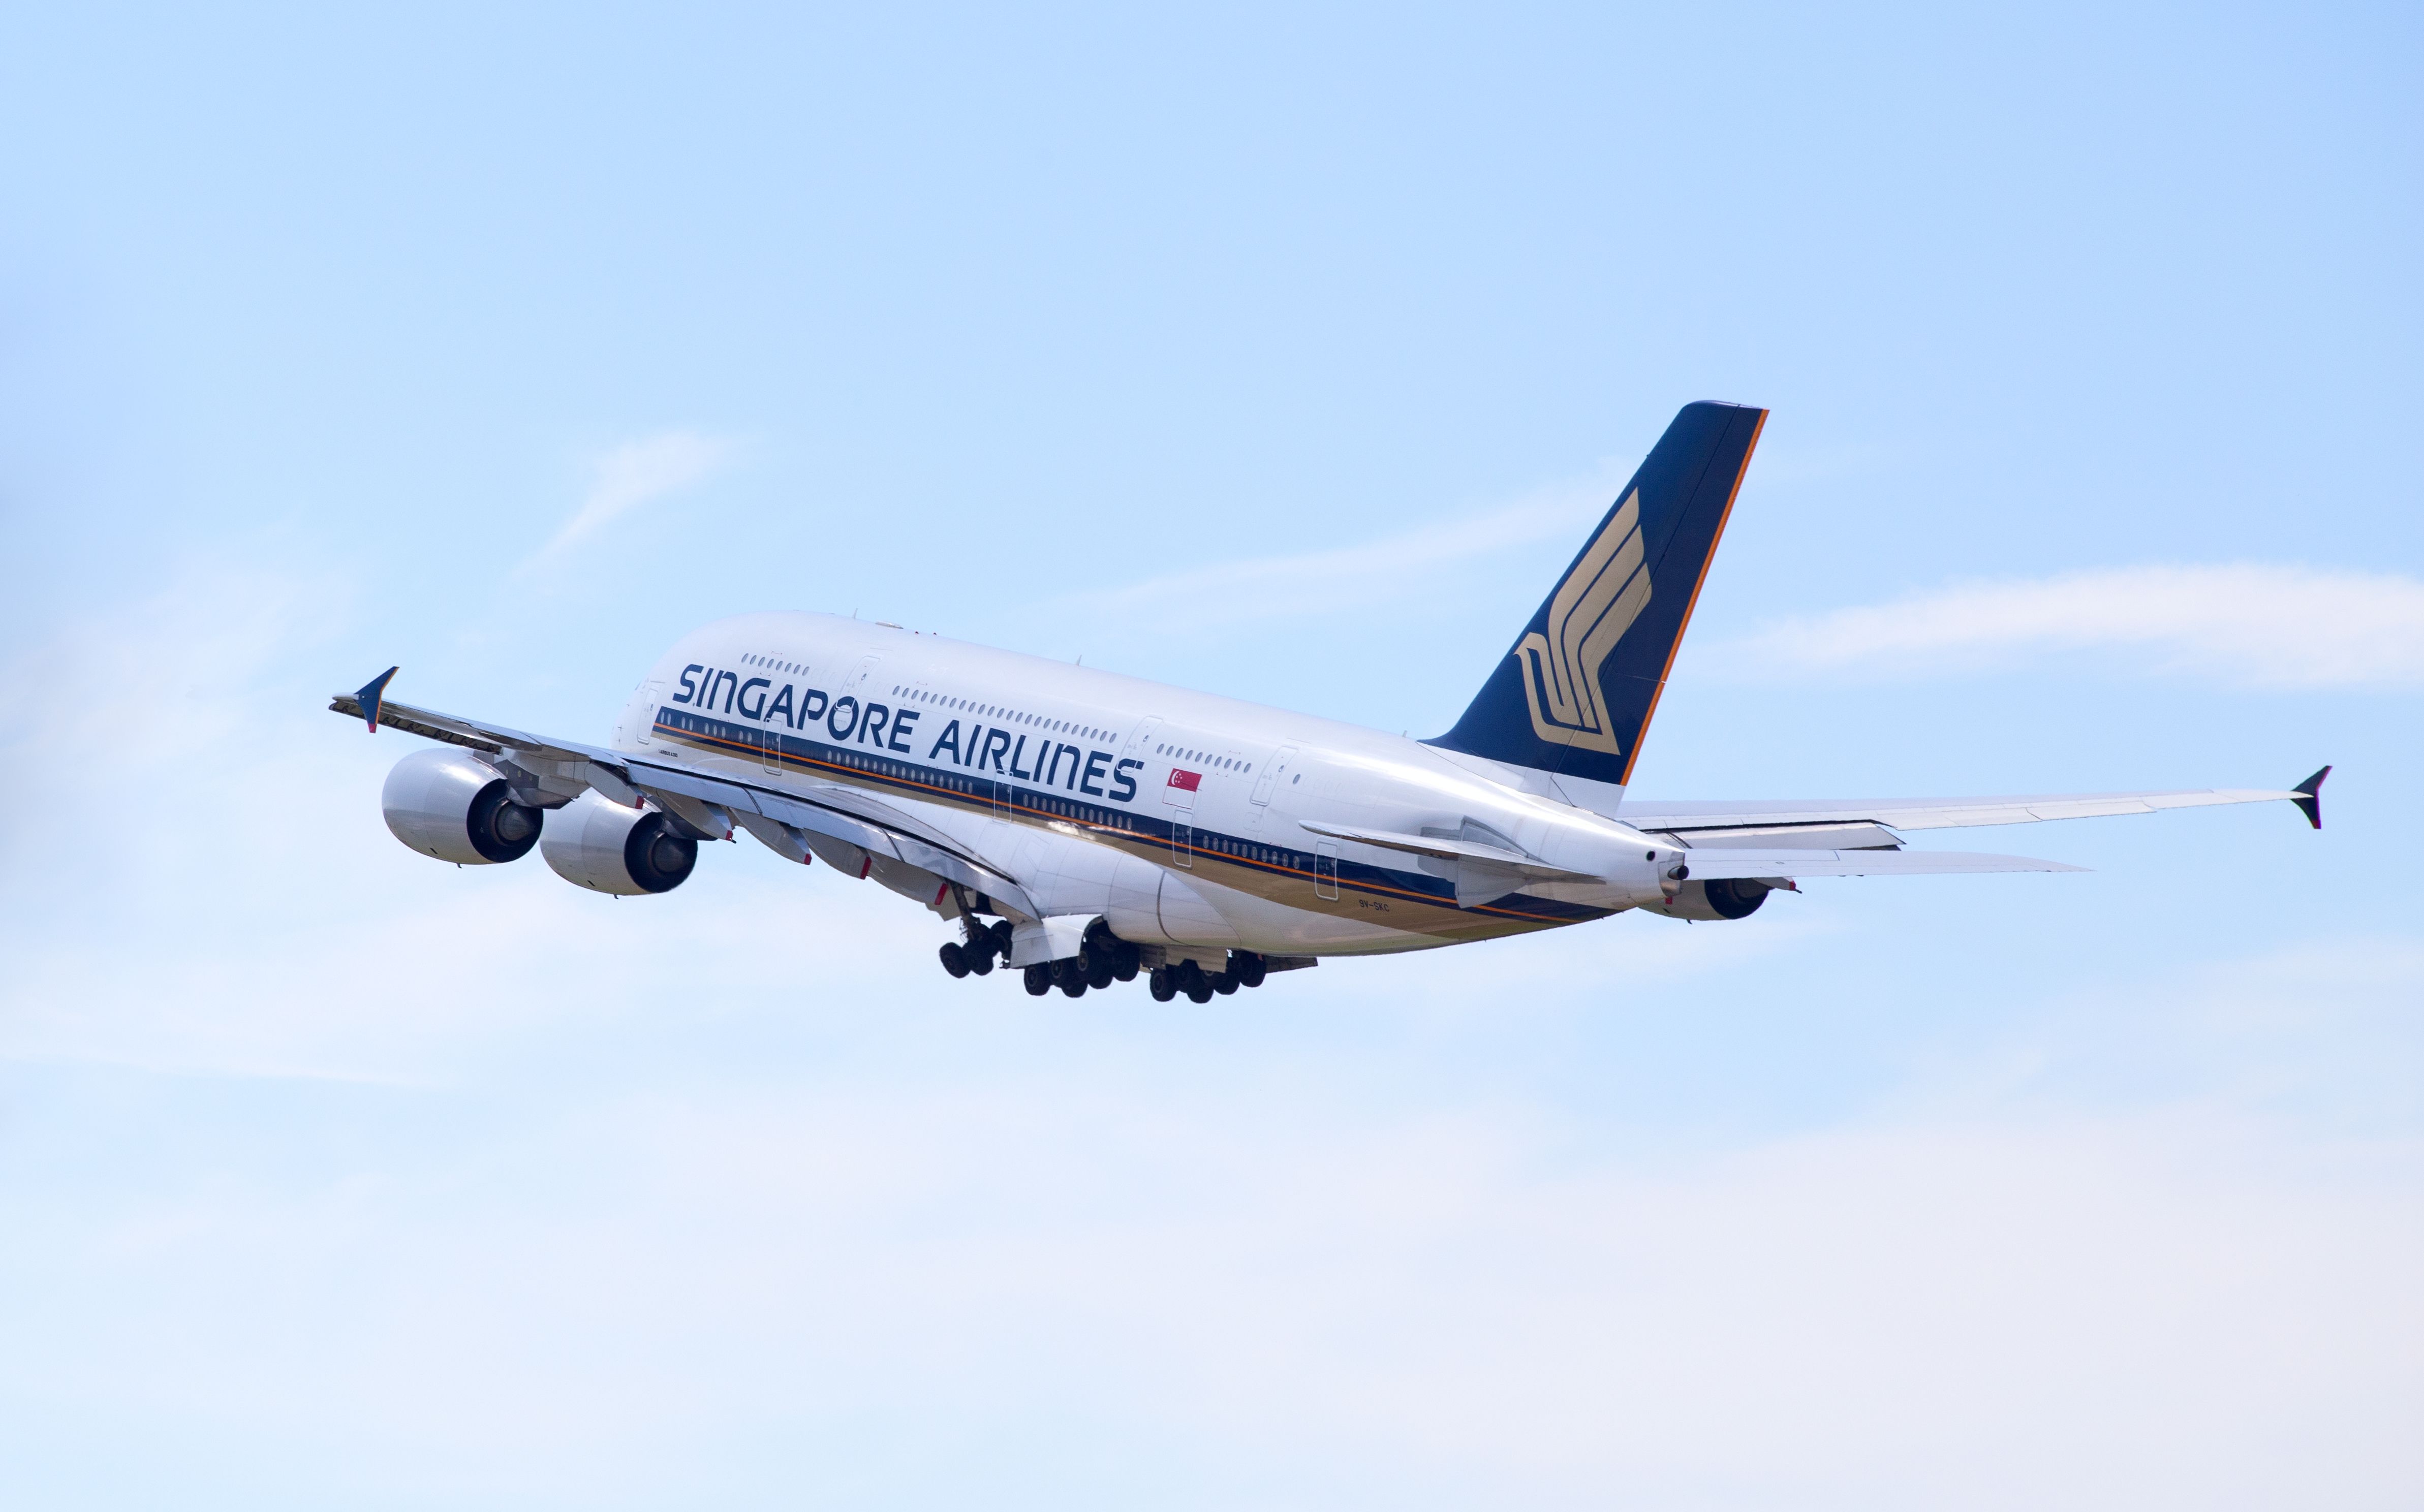 Singapore Airlines Airbus A380 departing Zurich Airport